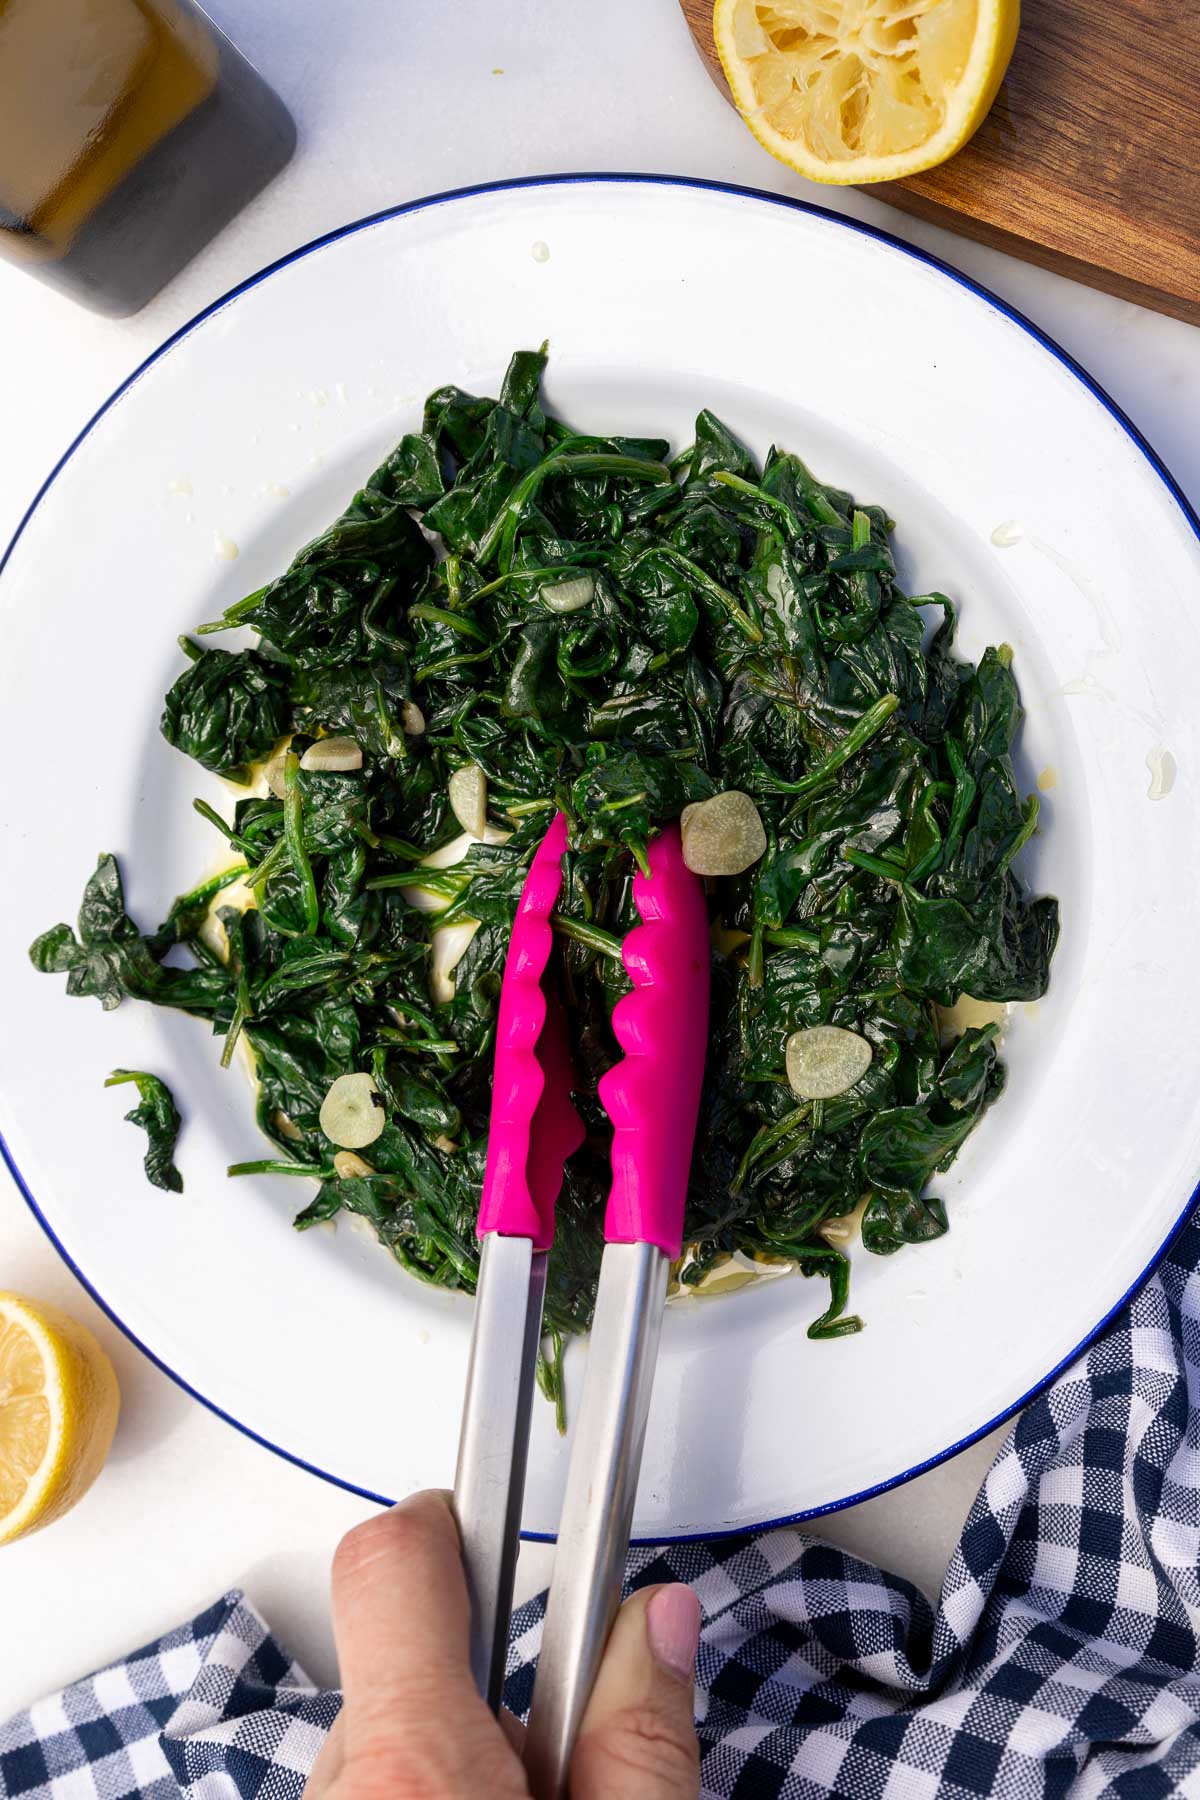 Someone's hand grabbing some sauteed frozen spinach with sliced garlic, lemon and olive oil with pink kitchen tongs with a blue and white tea towel next to the plate.